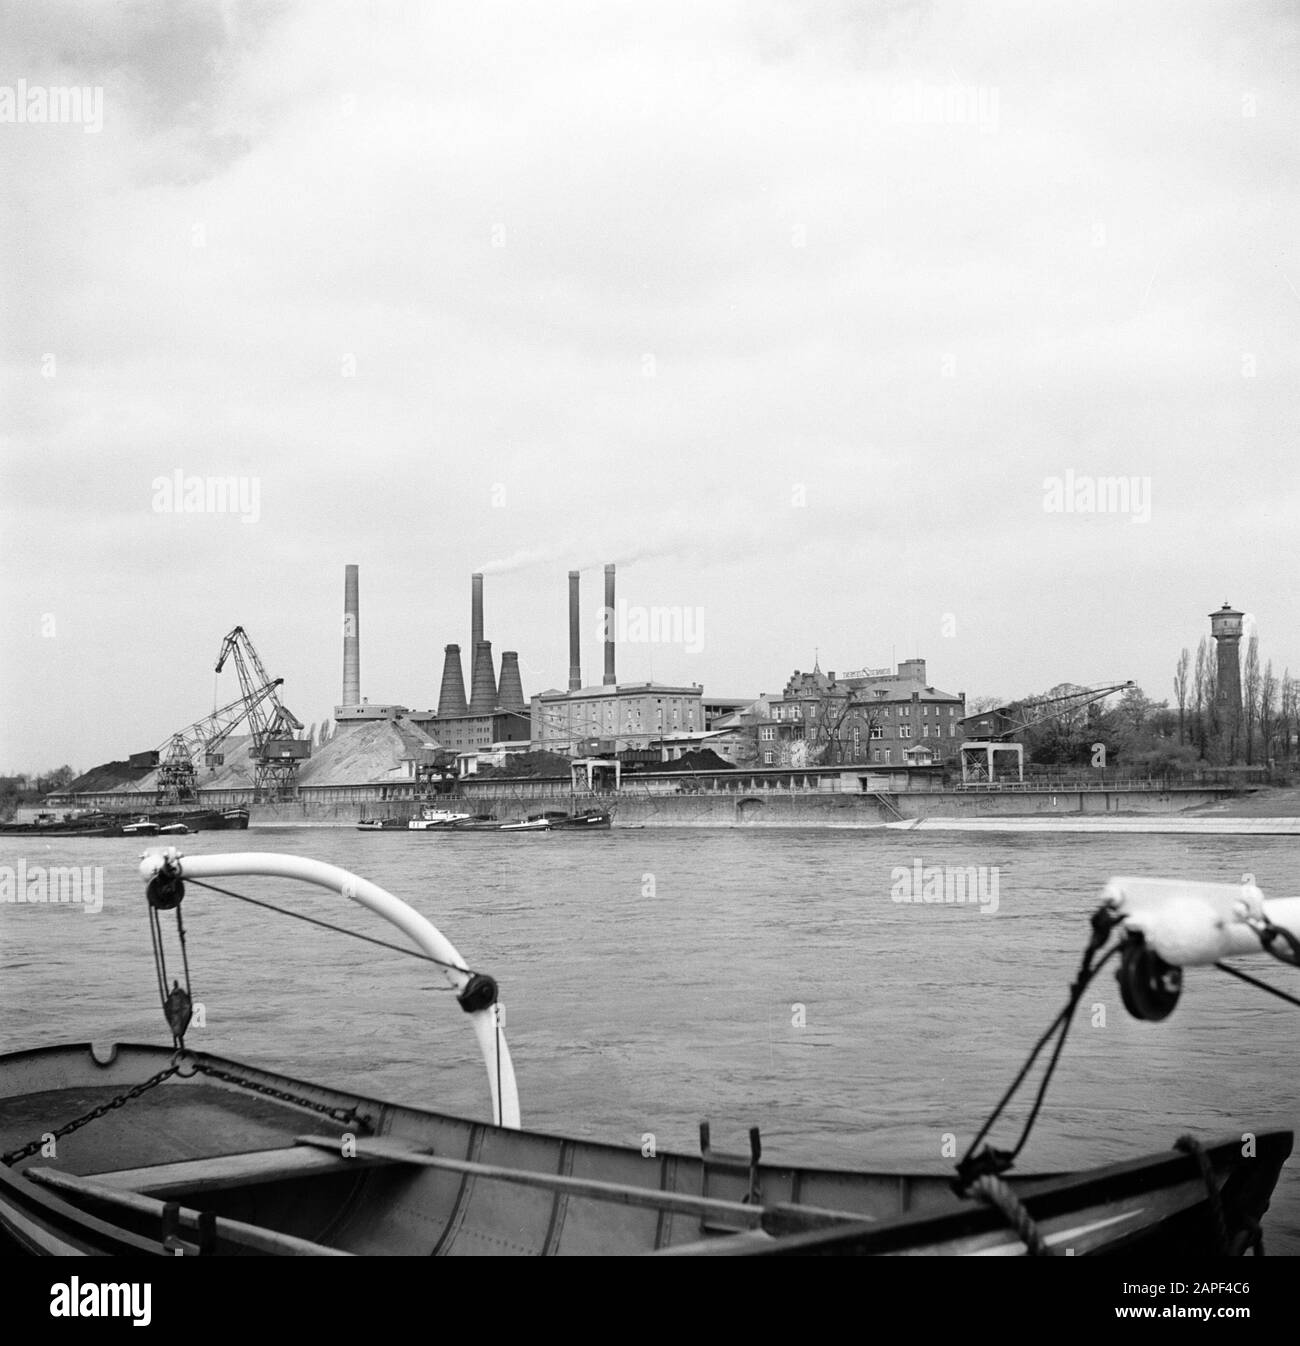 Rhine navigation, report from tug Damco 9: West Germany Description: Bonner  Zement factory at Oberkassel Date: April 1, 1955 Location: Bonn, Germany,  Oberkassel, West Germany Keywords: factors, cranes, lifeboats, rivers,  chimneys, towers